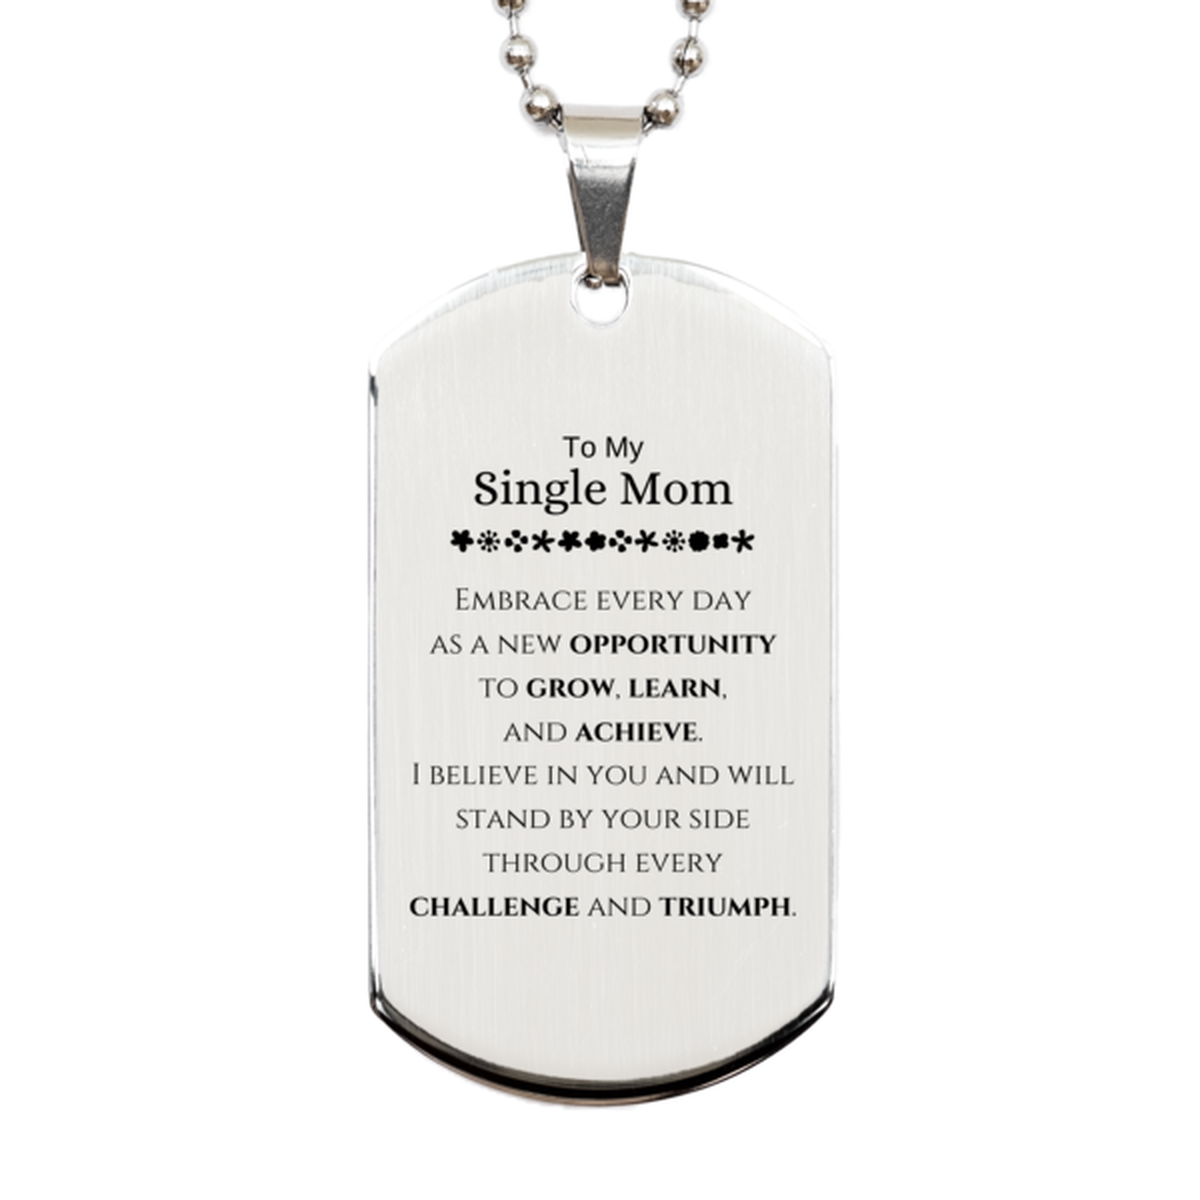 To My Single Mom Gifts, I believe in you and will stand by your side, Inspirational Silver Dog Tag For Single Mom, Birthday Christmas Motivational Single Mom Gifts